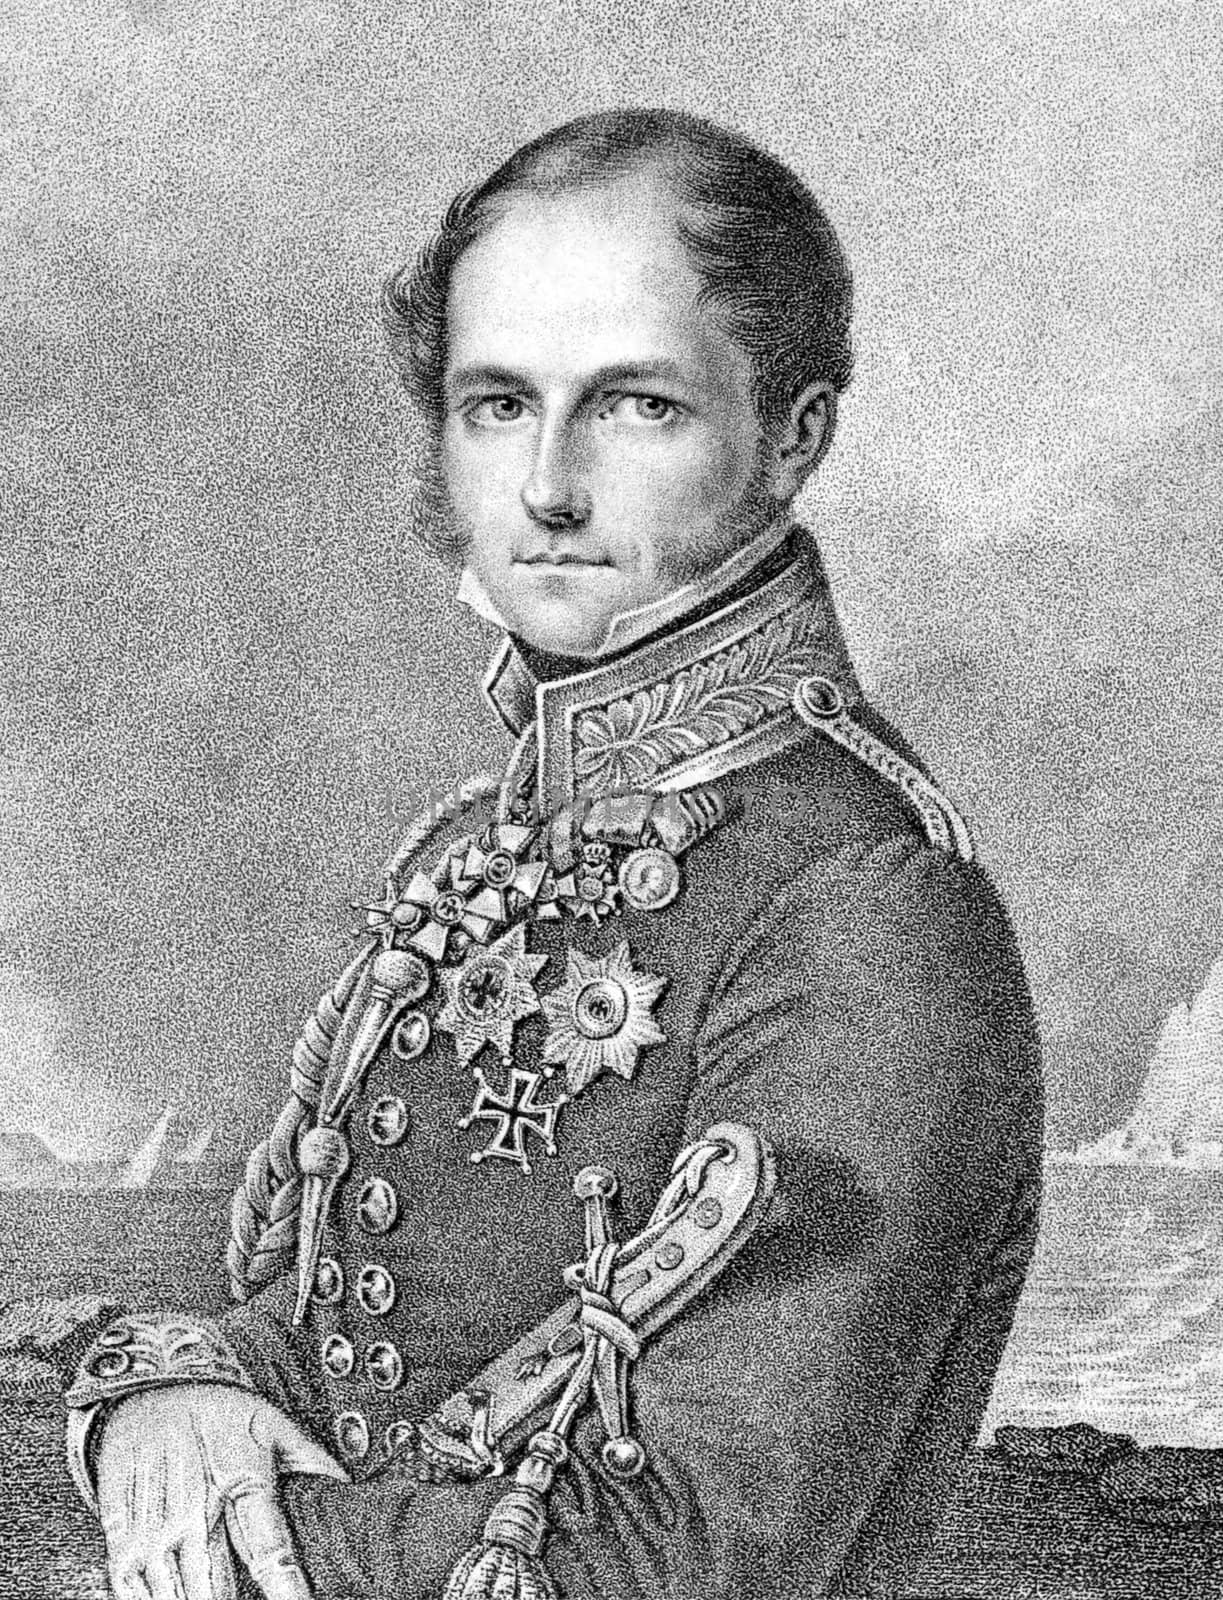 Leopold I of Belgium (1790-1865) on engraving from 1859. First king of the Belgians. Engraved by Vogel junior and published in Meyers Konversations-Lexikon, Germany,1859.